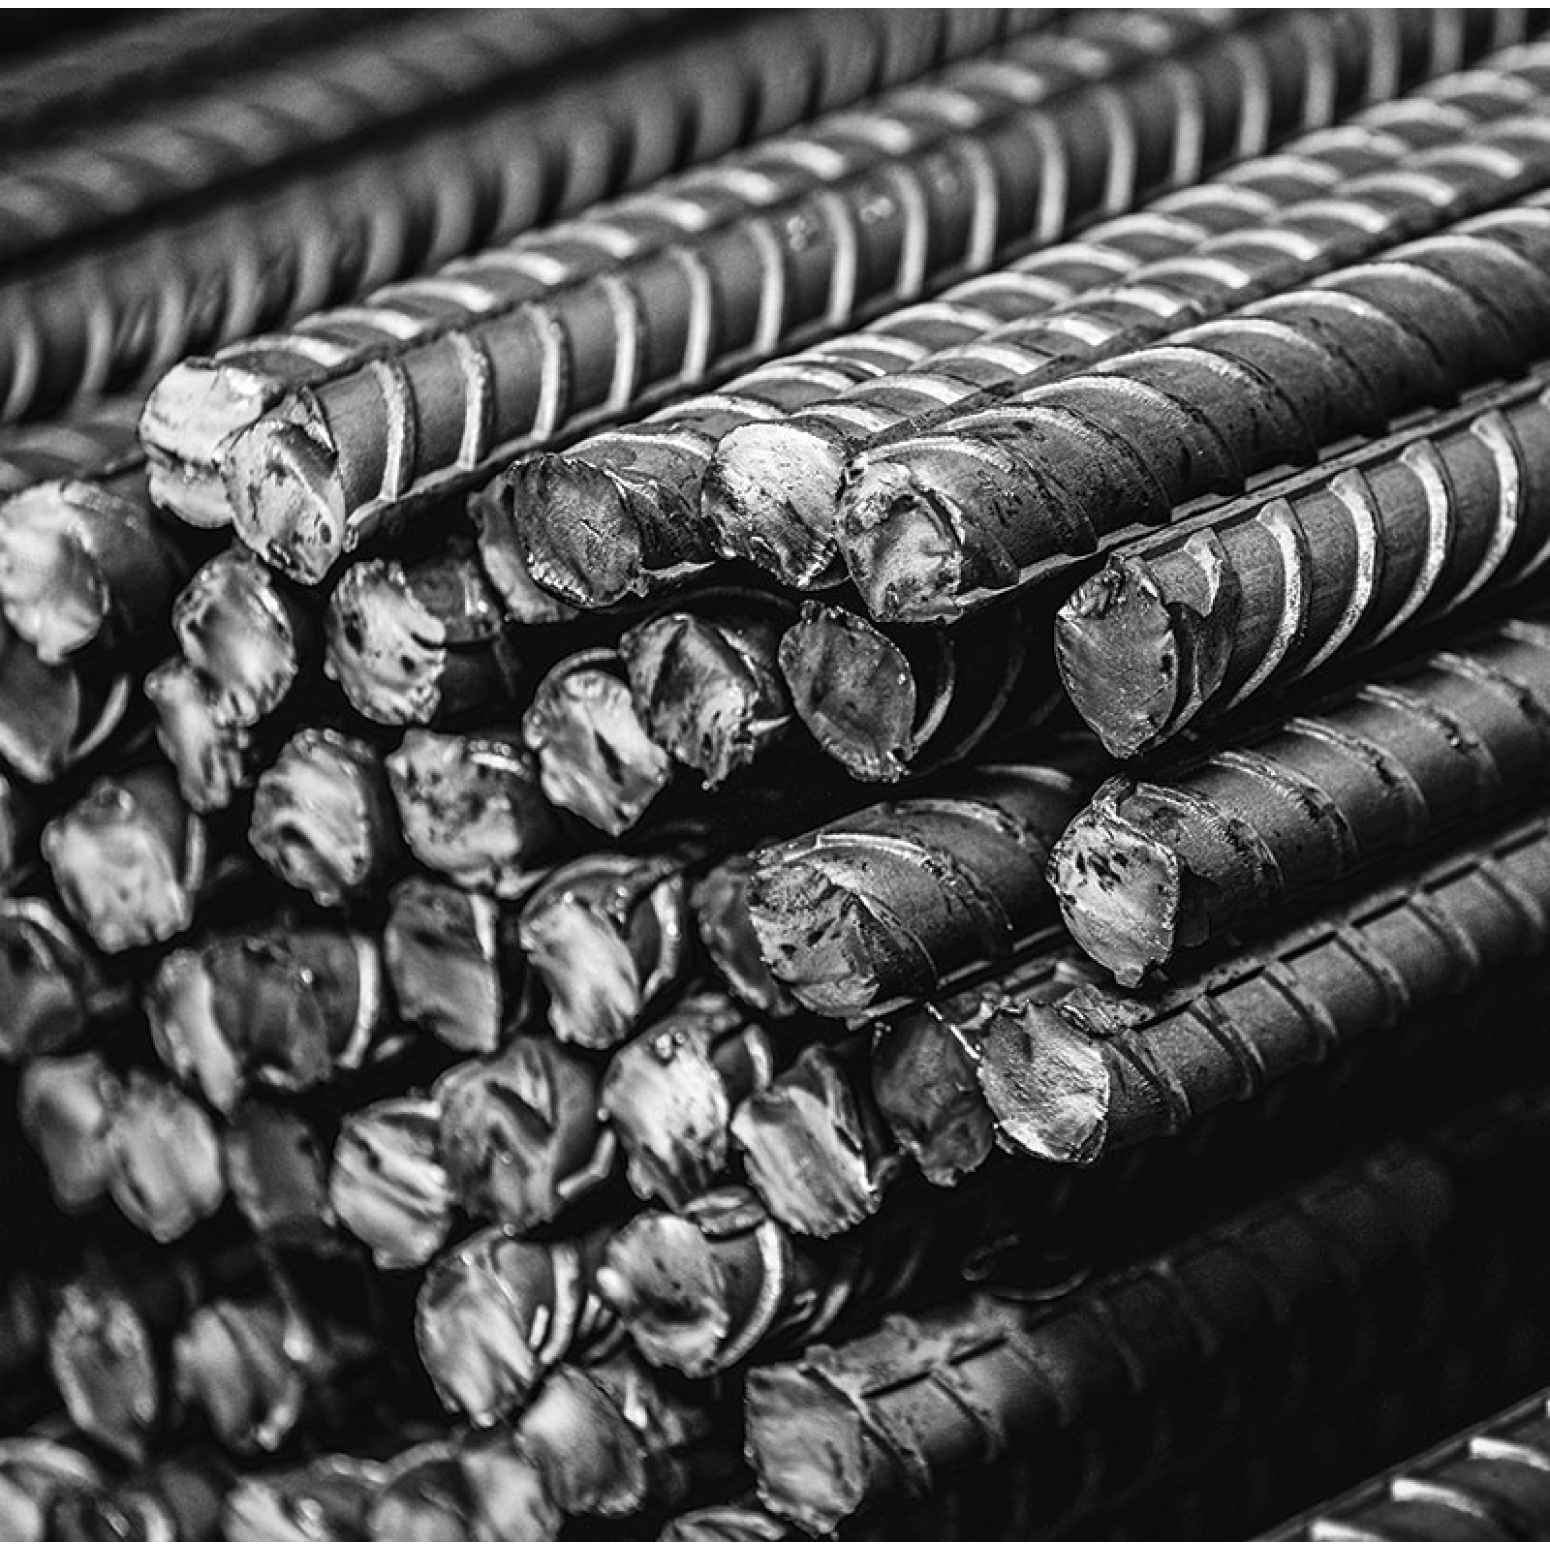 Deformed Steel Bars TISI Standards assorted brands SD40T DB16 length 10m 15.78kg per pc price for 7 tons and up